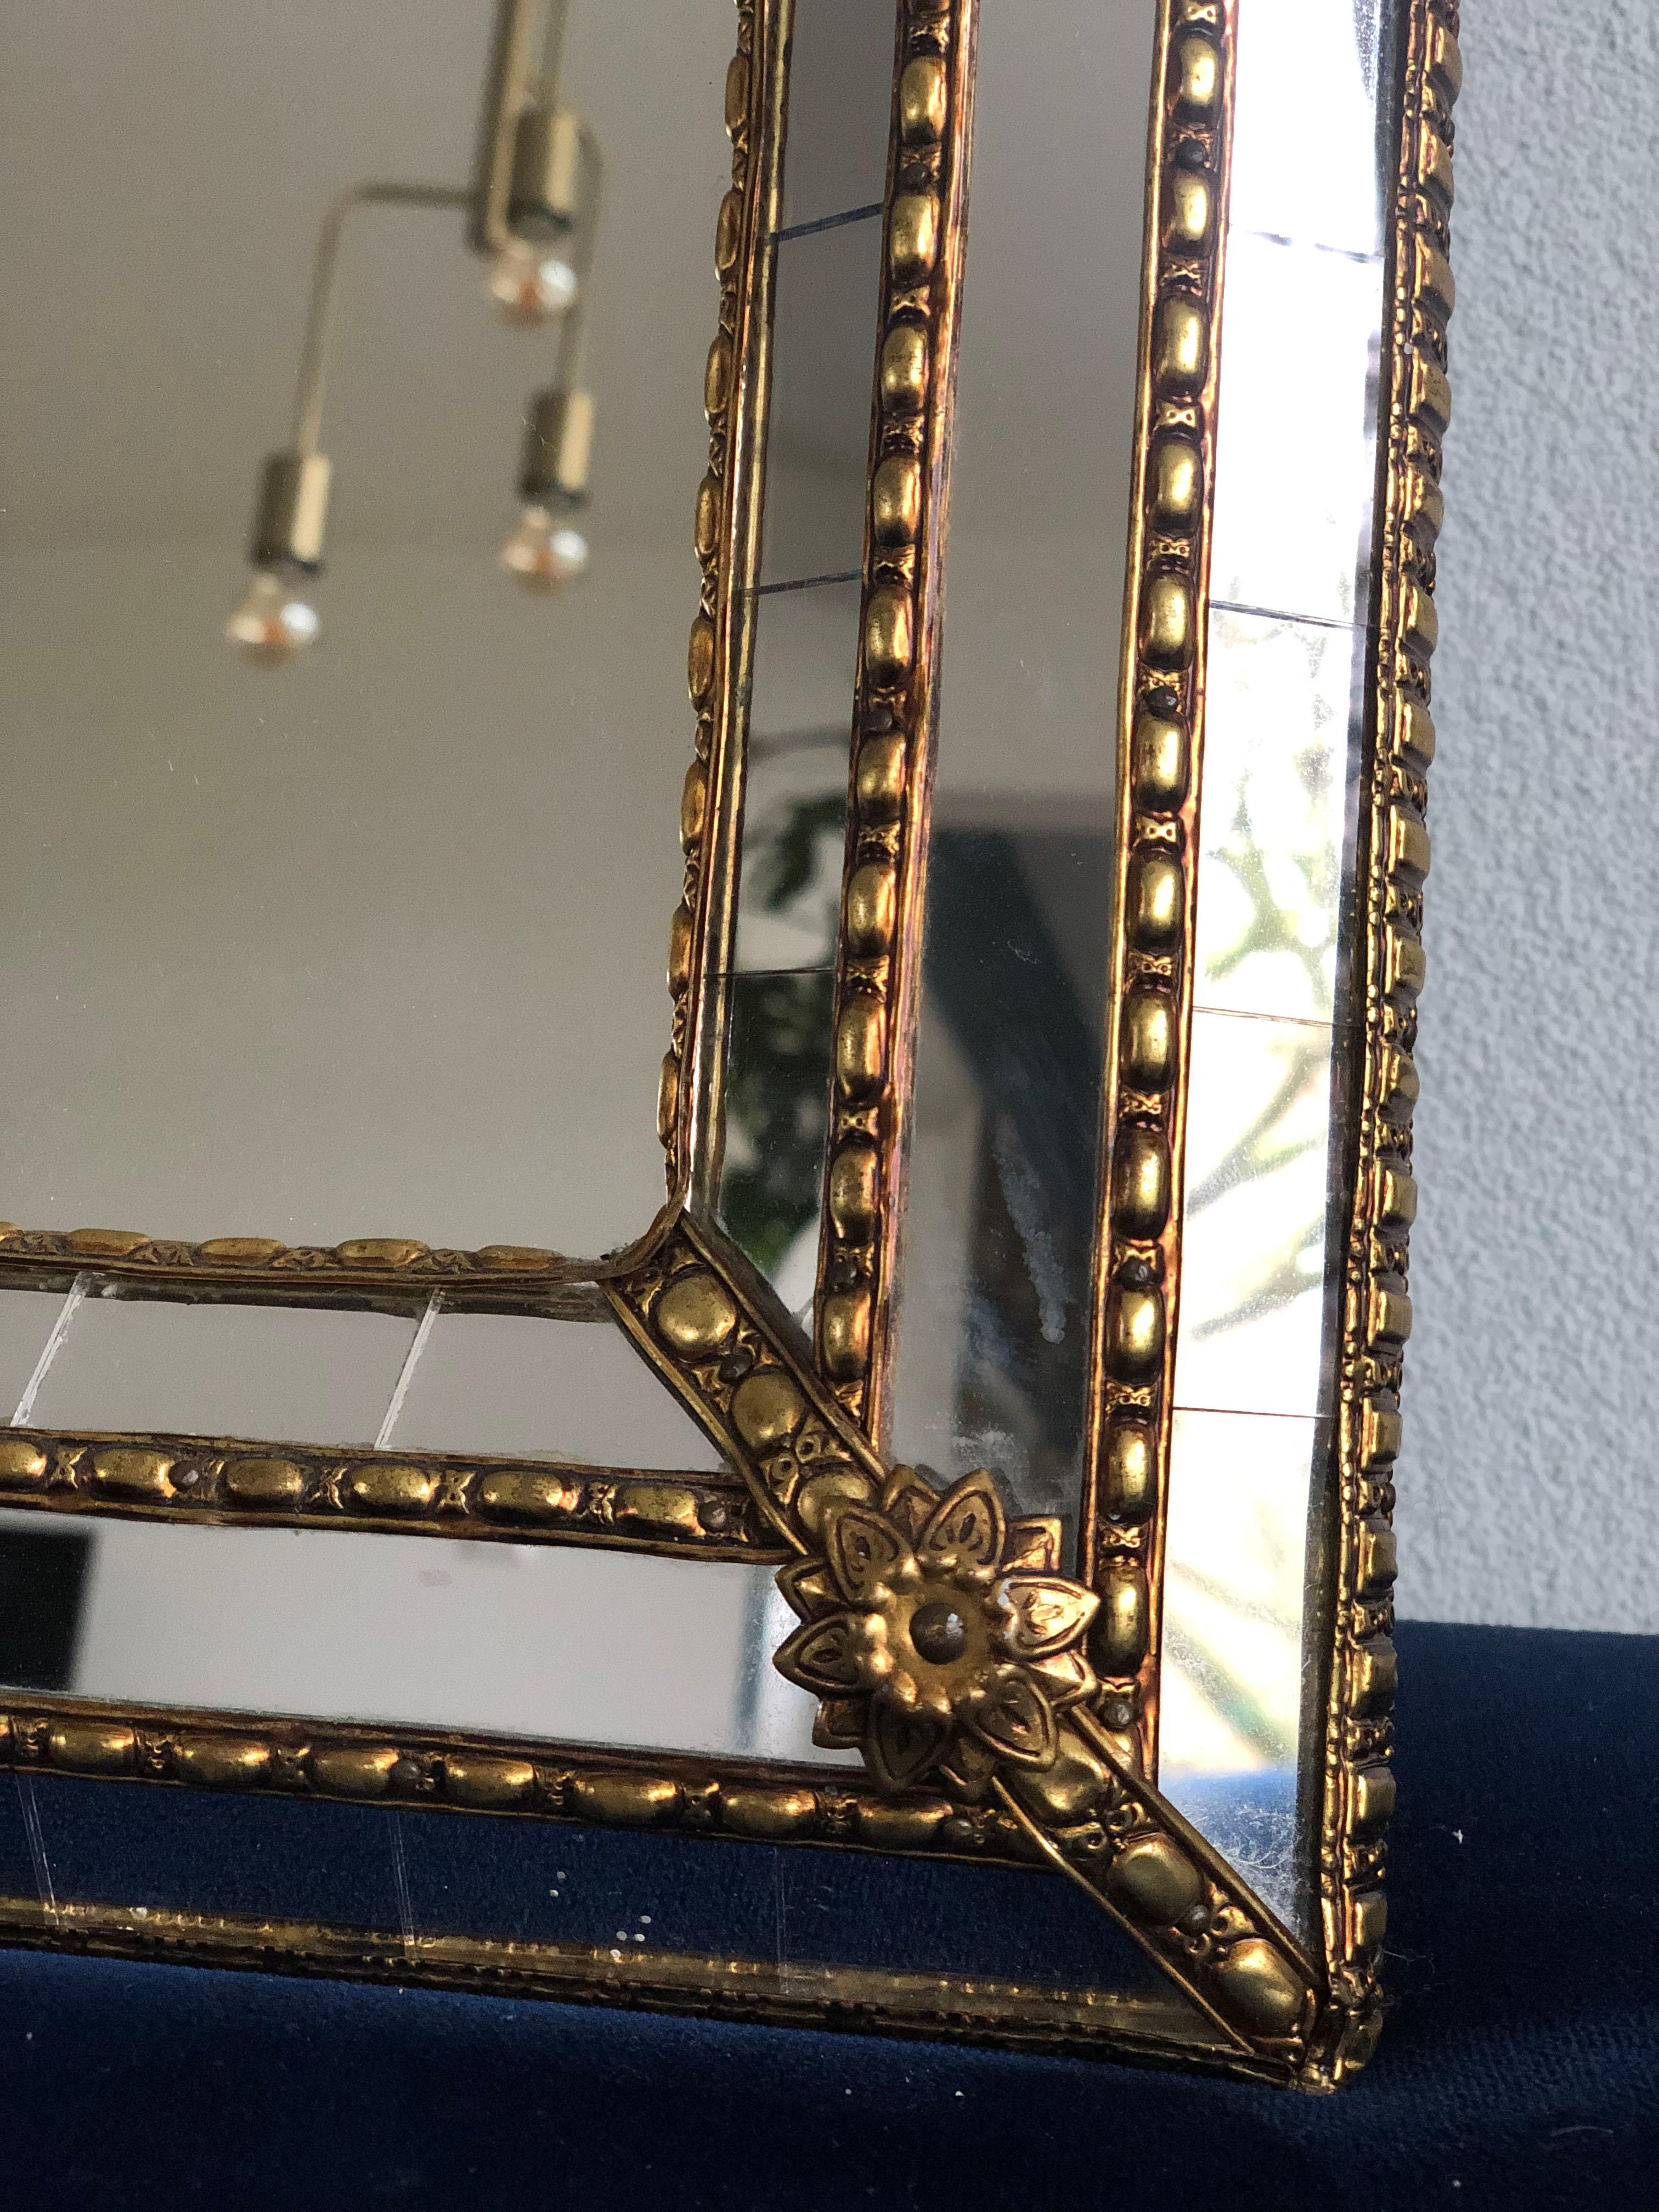 Beautiful Spanish square mirror with a Venetian glass frame with a brass golden strip. The frame is made with small crystals both on the outside and inside, and larger ones in the center line. The brass strip holds the mirrors together.

Handmade